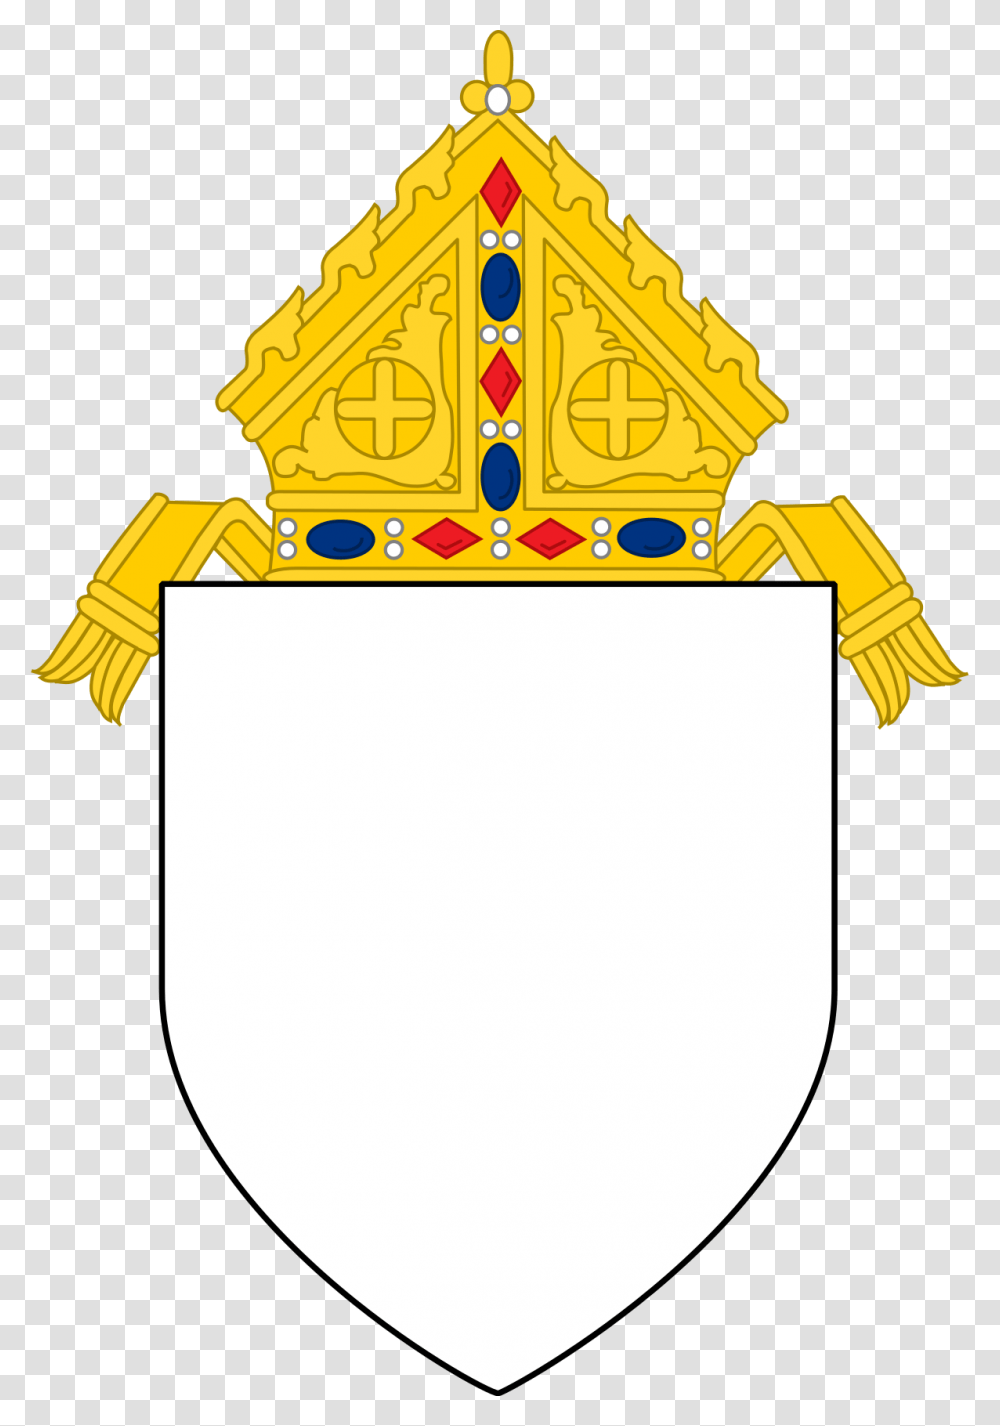 Diocese Coat Of Arms Template, Armor, Lamp, Shield Transparent Png